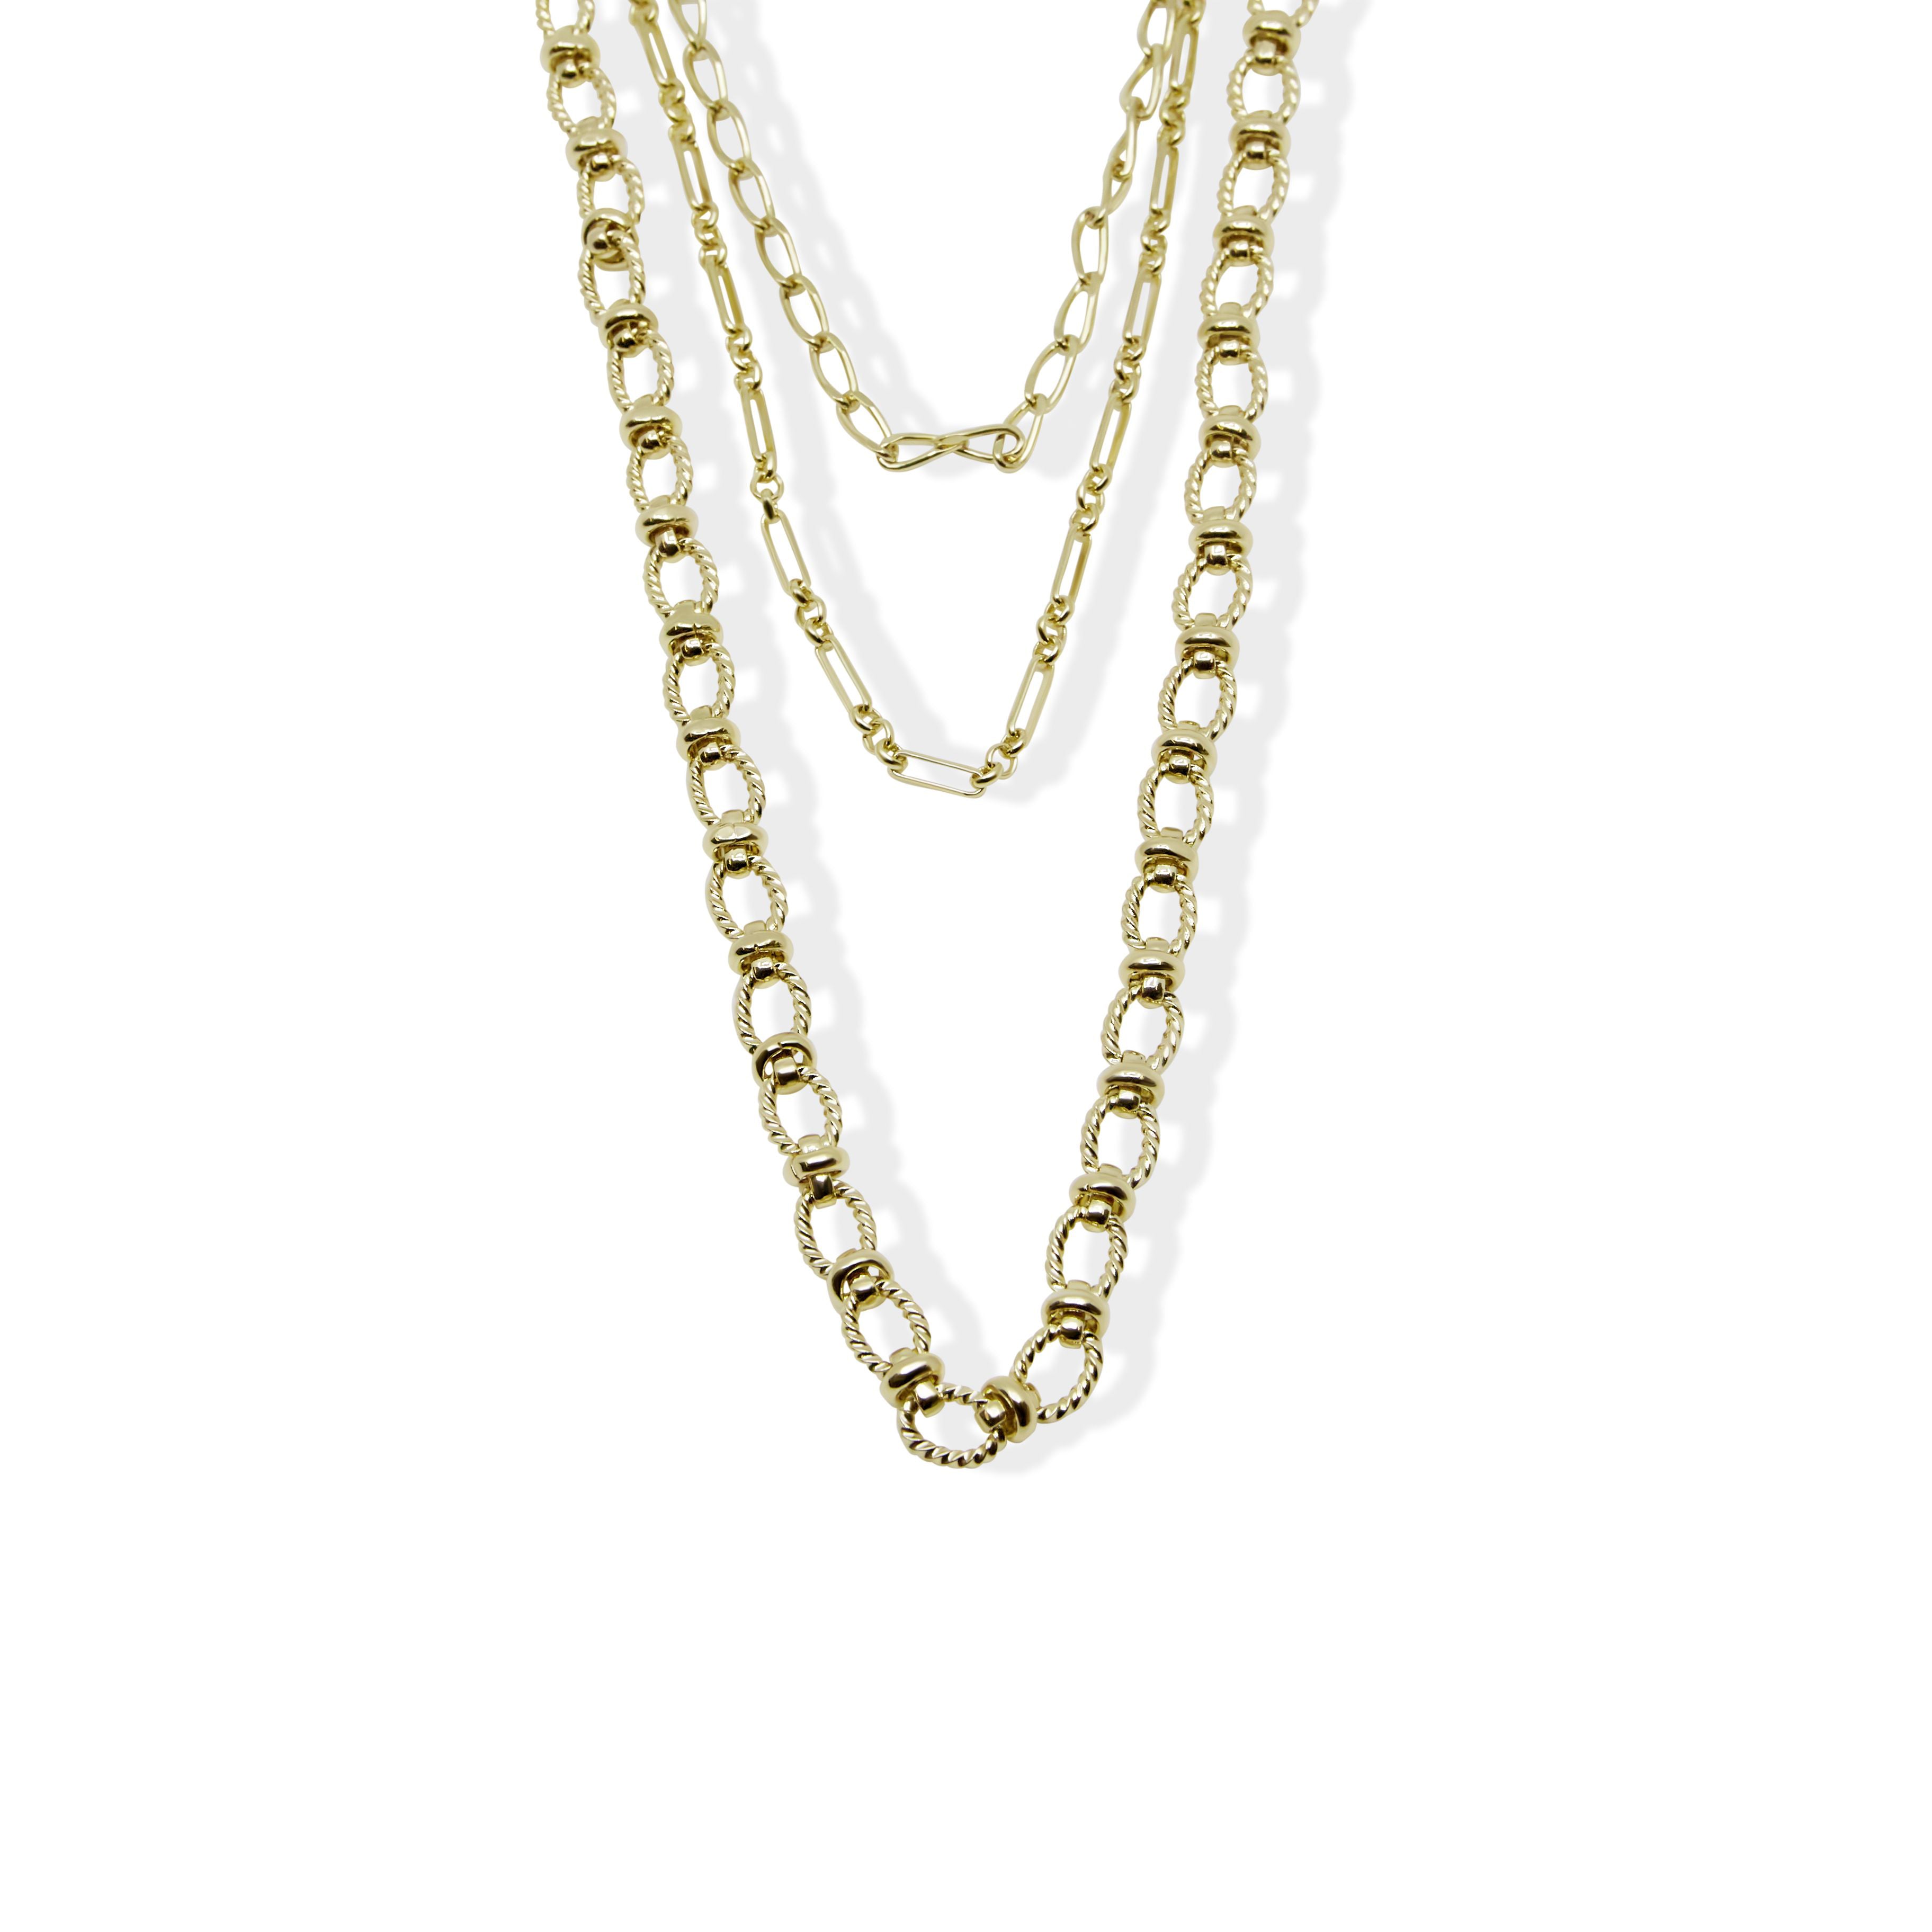 THE CELI TRIPLE LAYERED NECKLACE